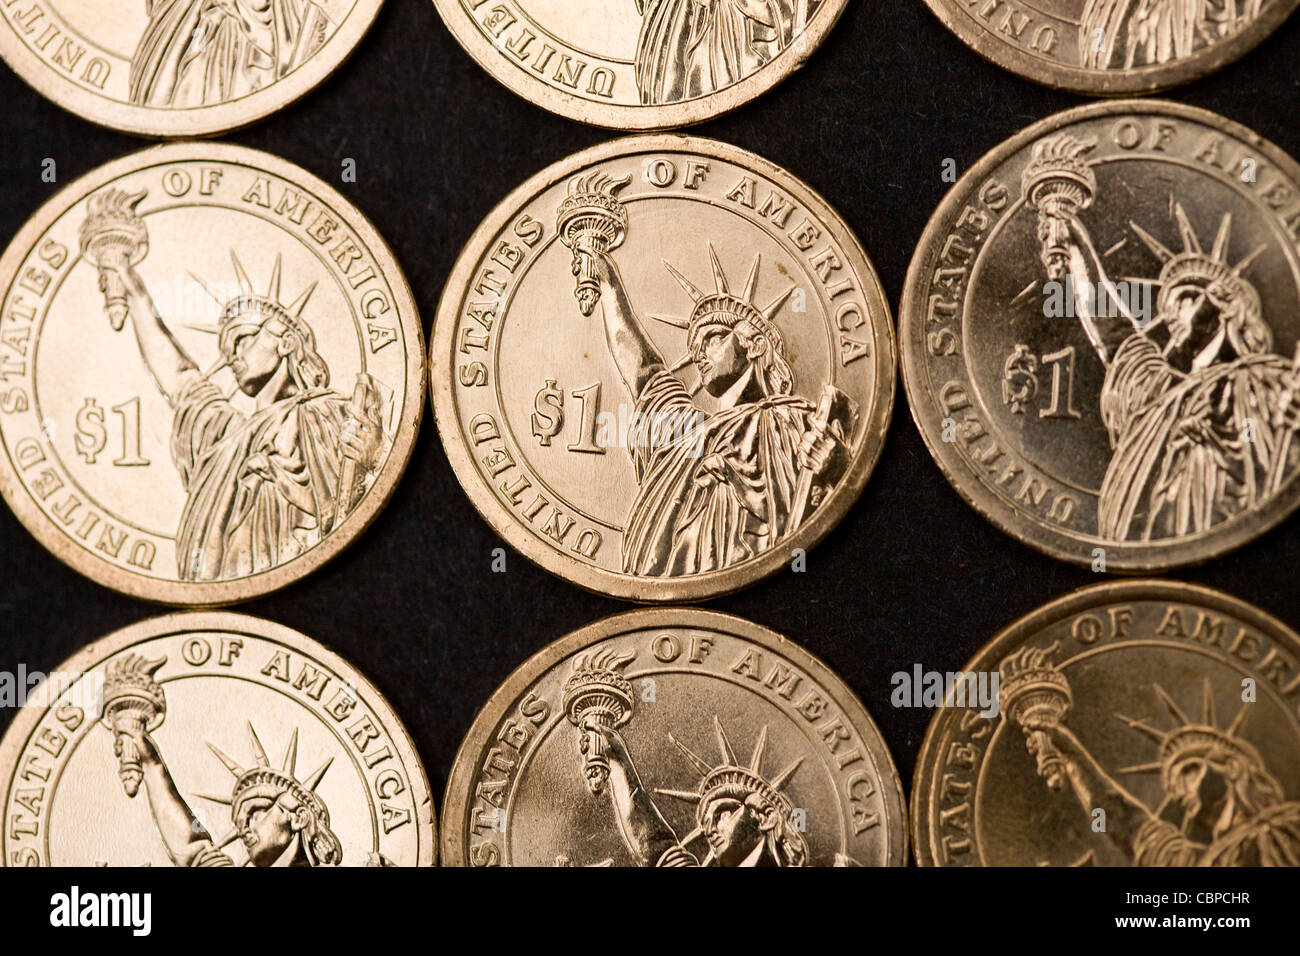 United States one dollar coins.  Stock Photo